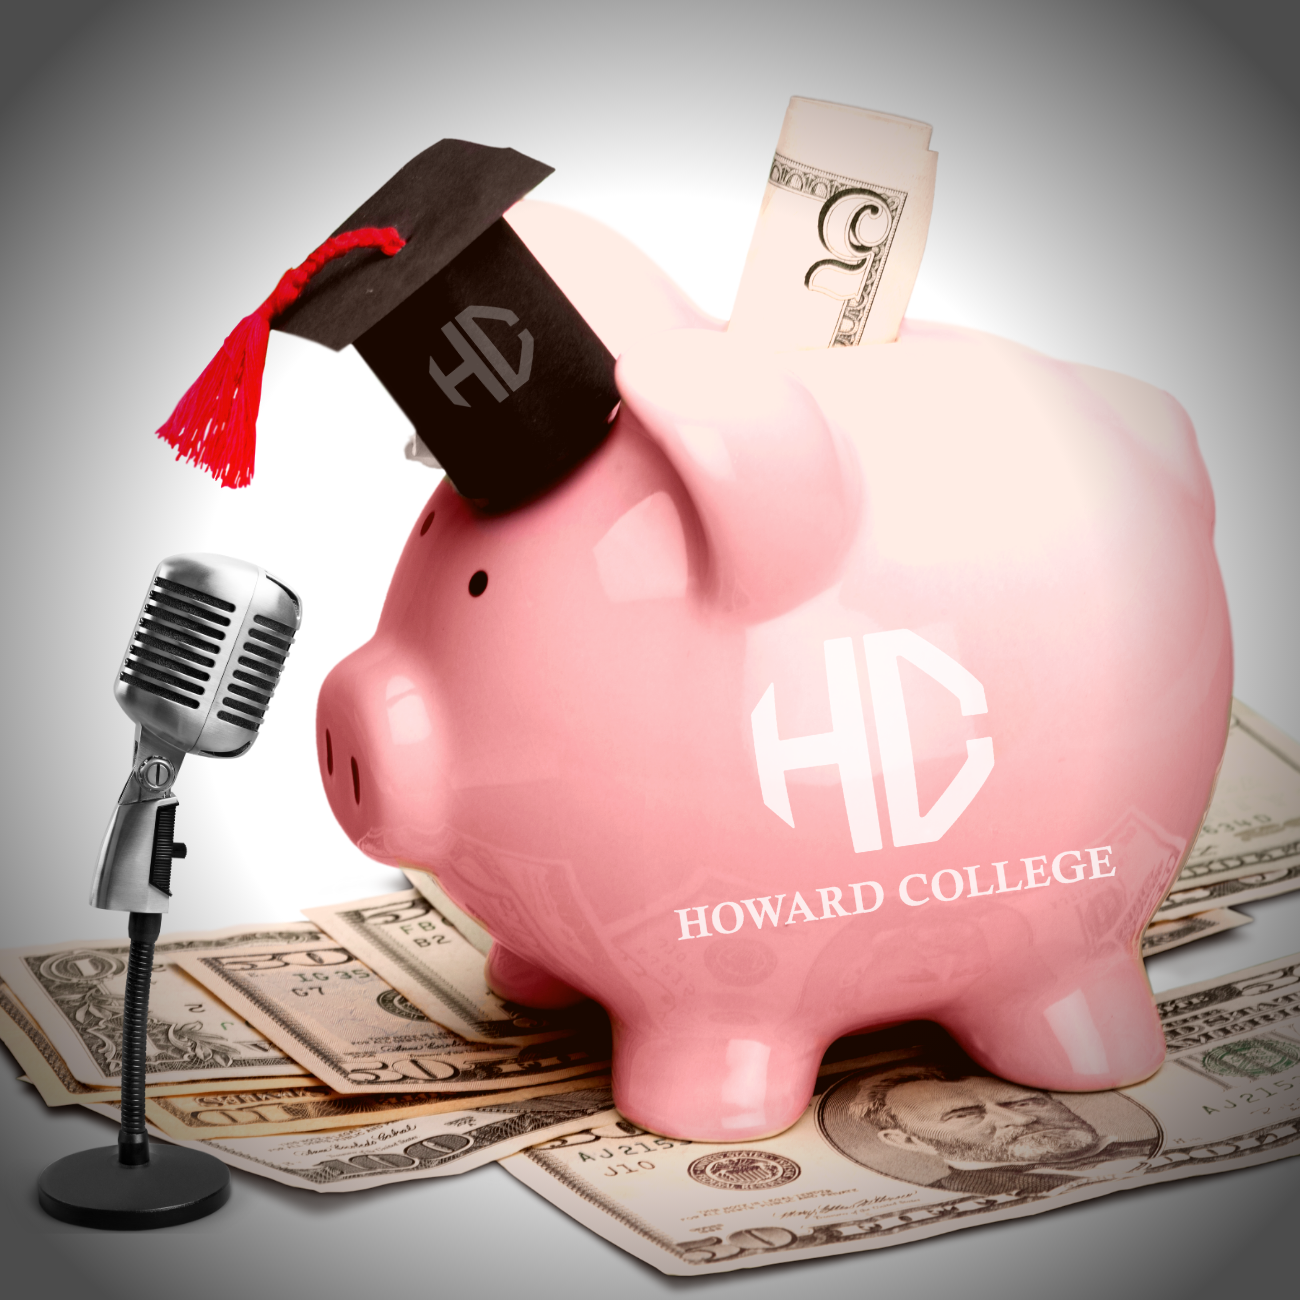 Piggy bank with H Clogo on site and grad cap on head.